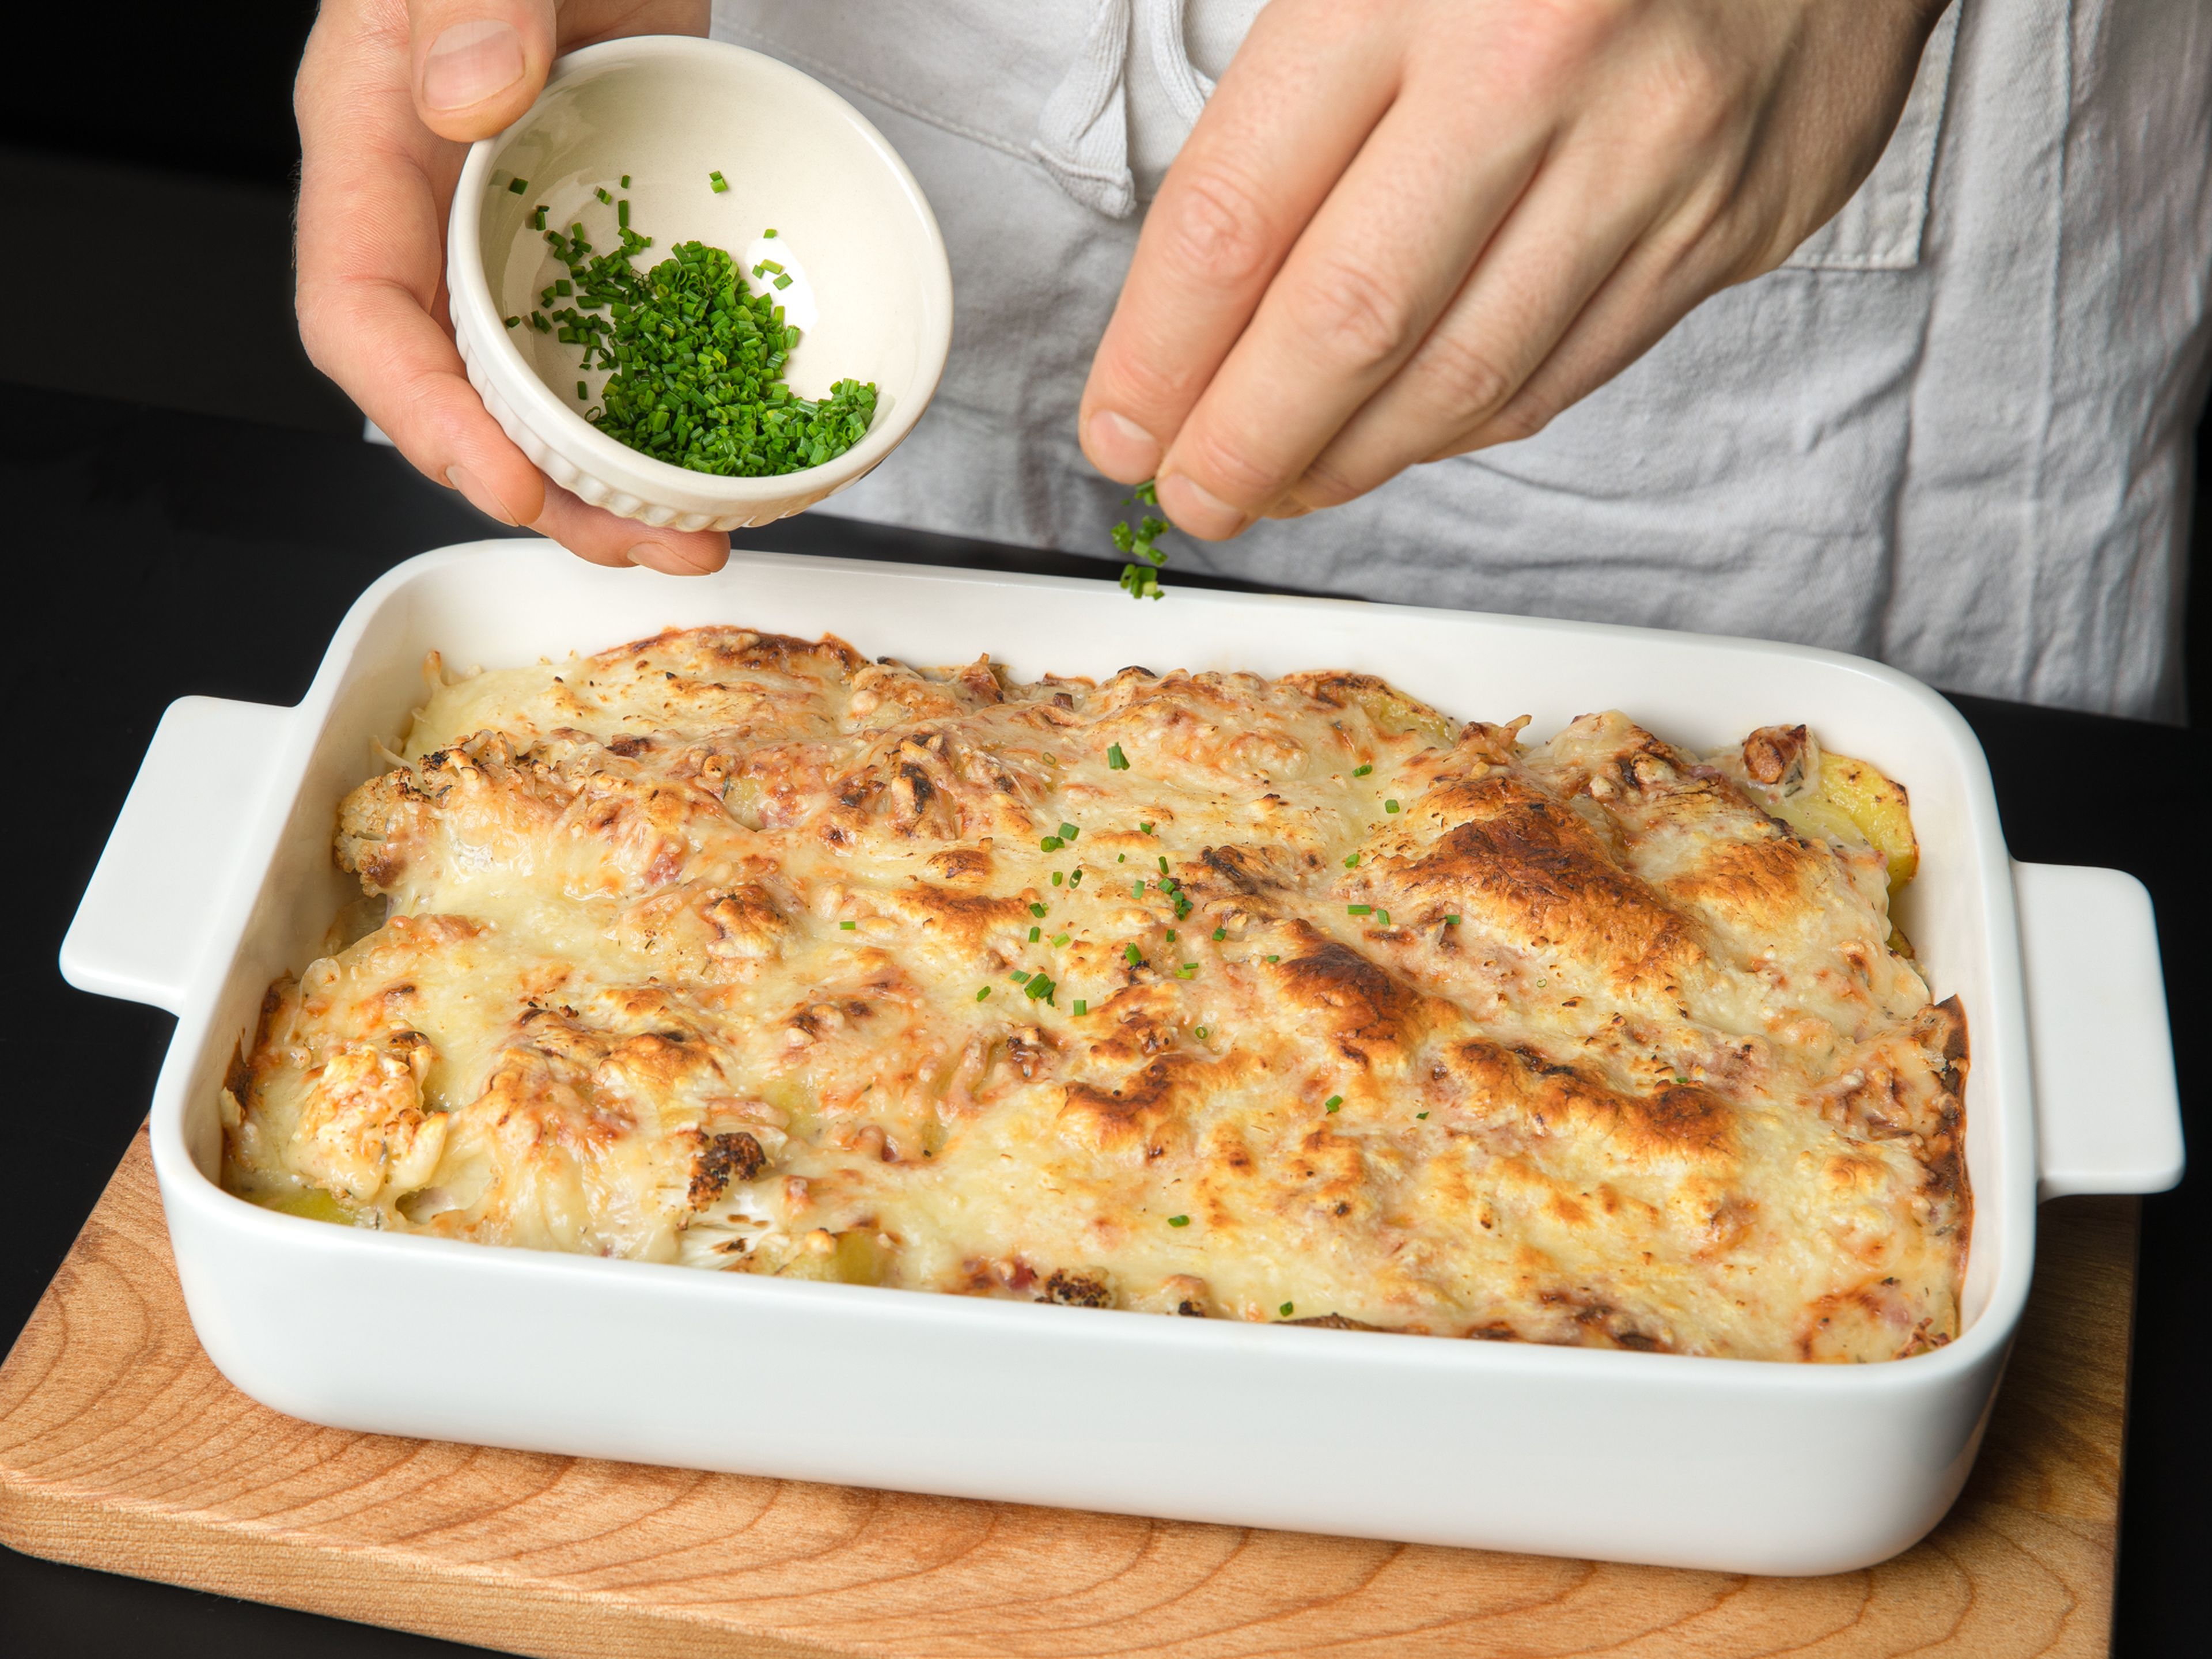 After baking, let the casserole cool slightly and then serve garnished with chives.